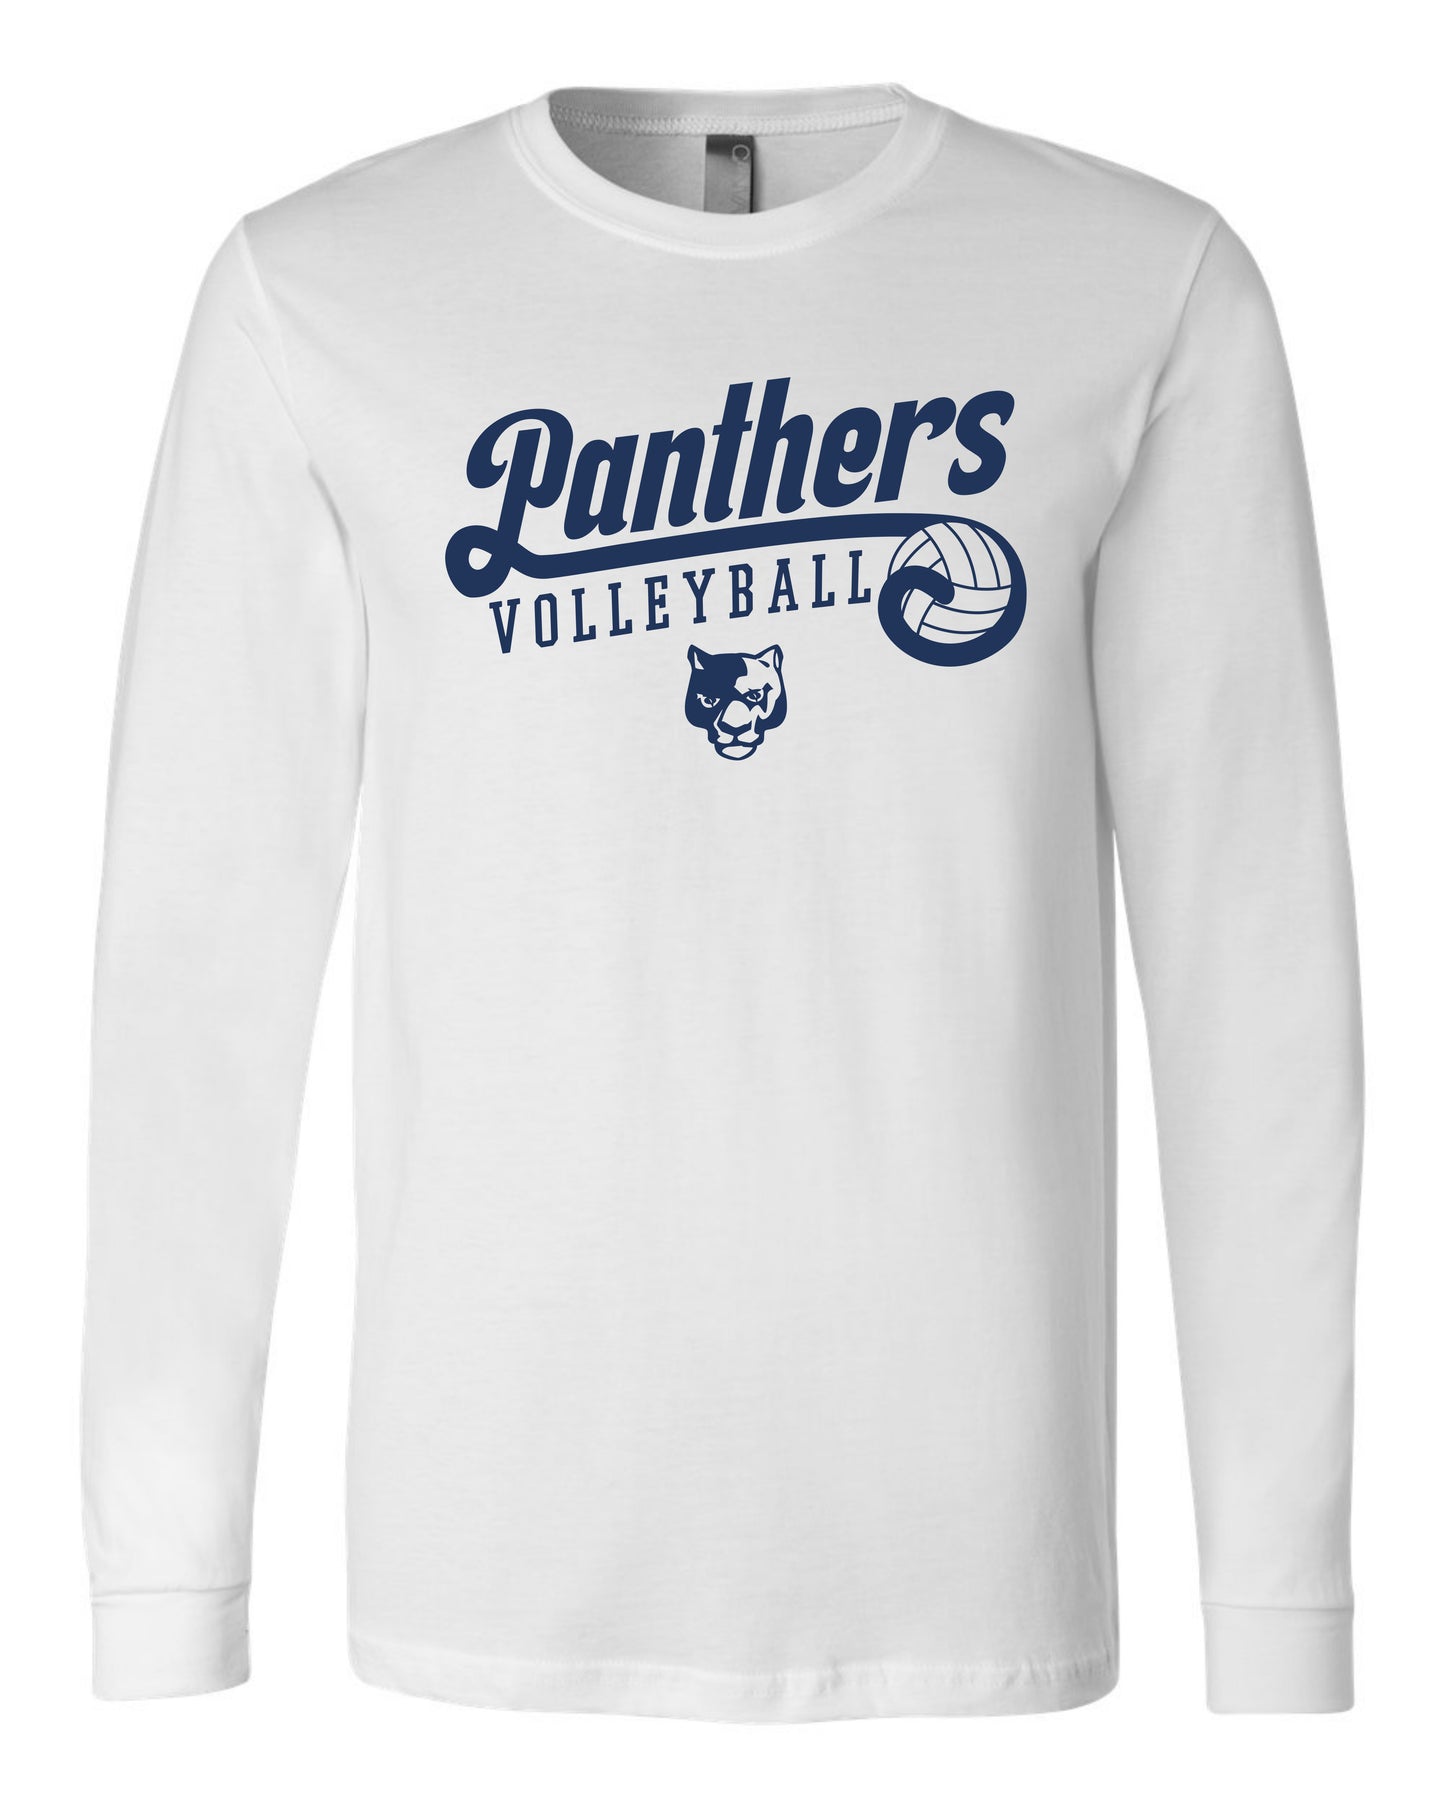 Panthers Volleyball Retro - Youth Long Sleeve